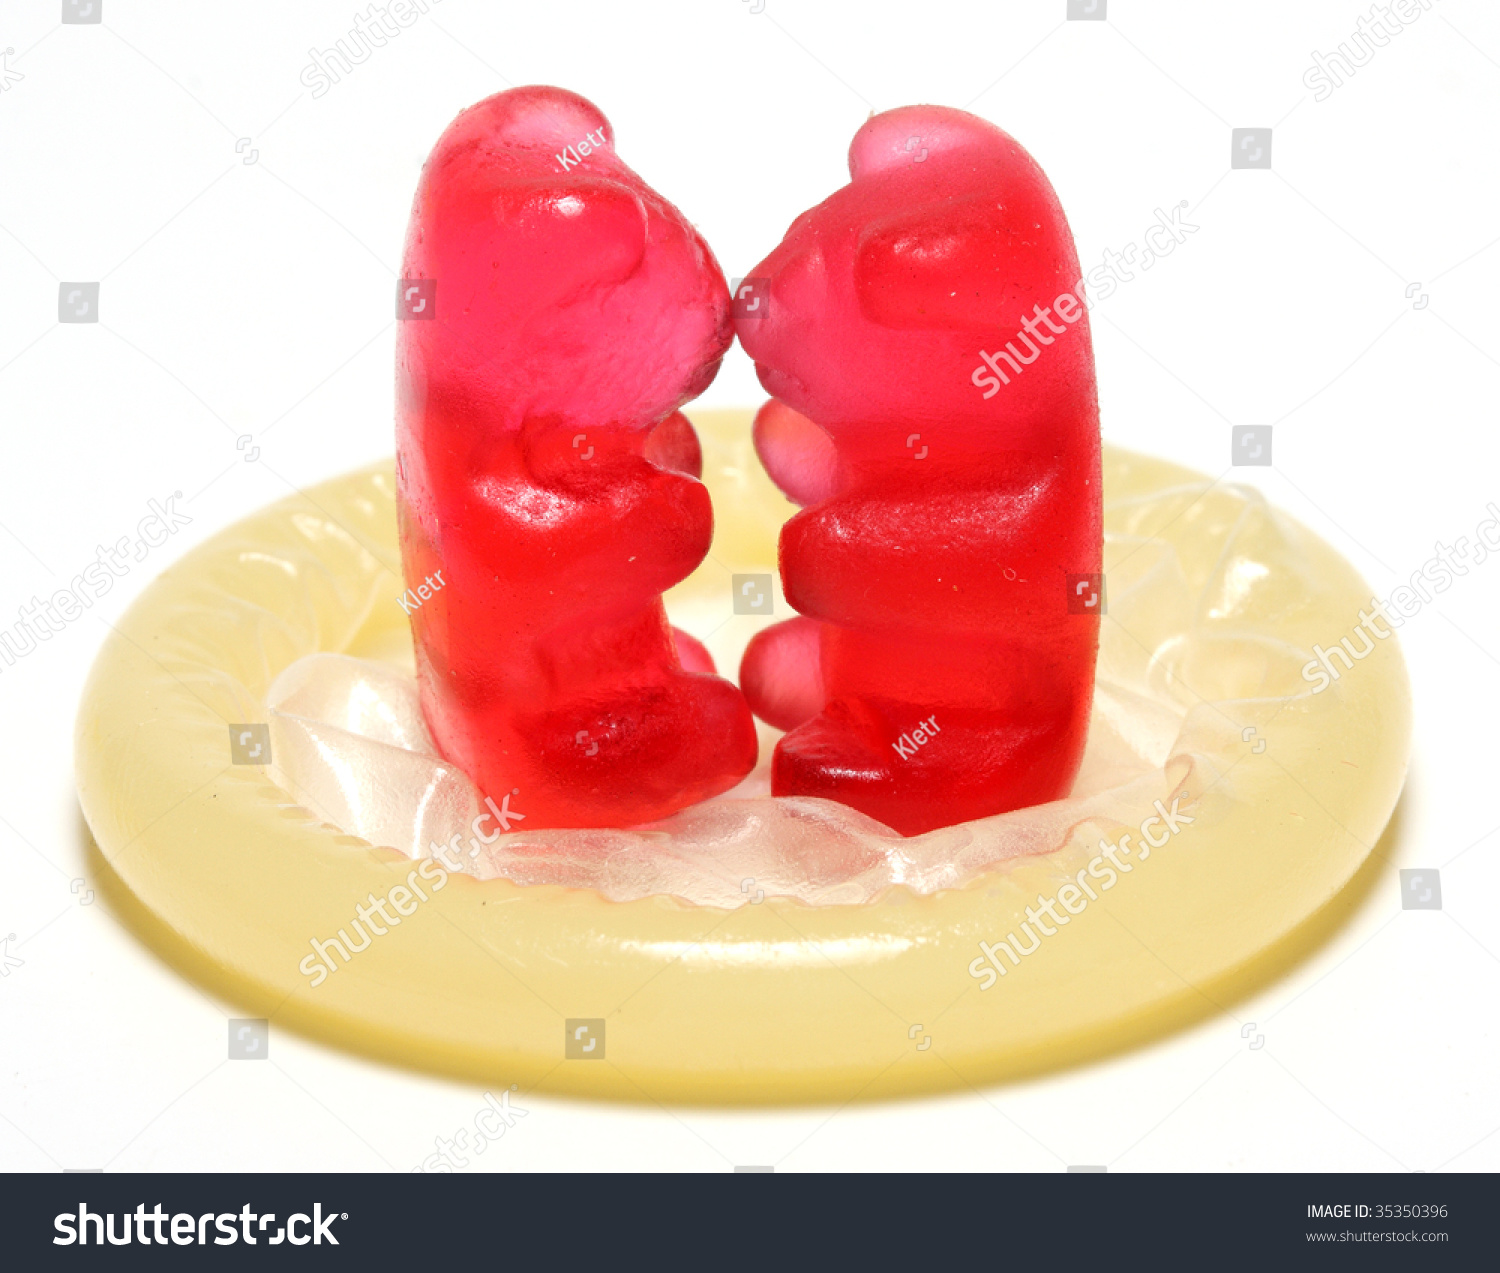 Loving red jelly bears couple on a condom - conceptual image - on white background #35350396